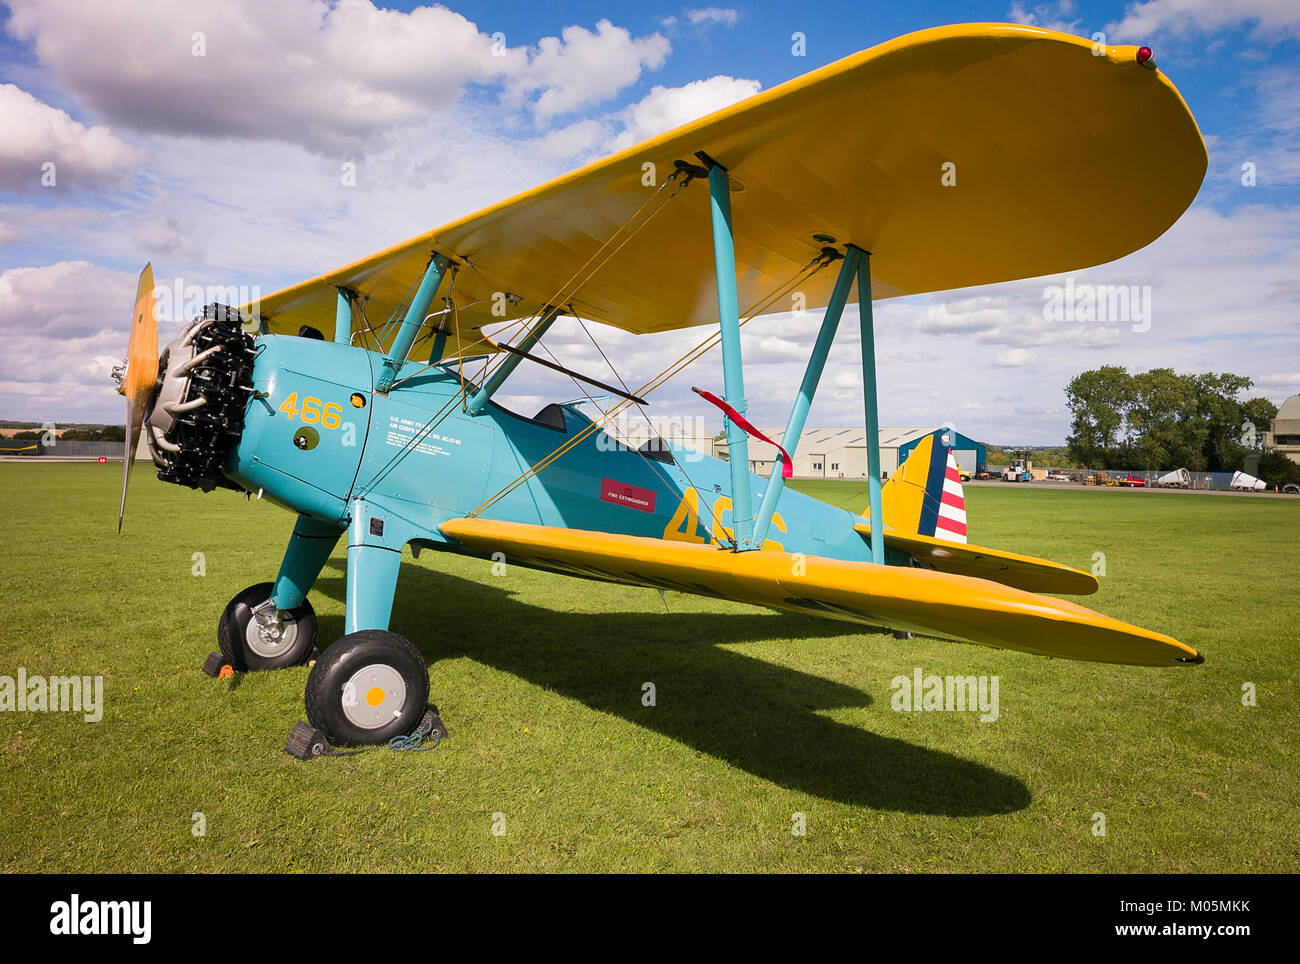 Boeing Stearman biplane from the 1930s at an English show in England UK Stock Photo